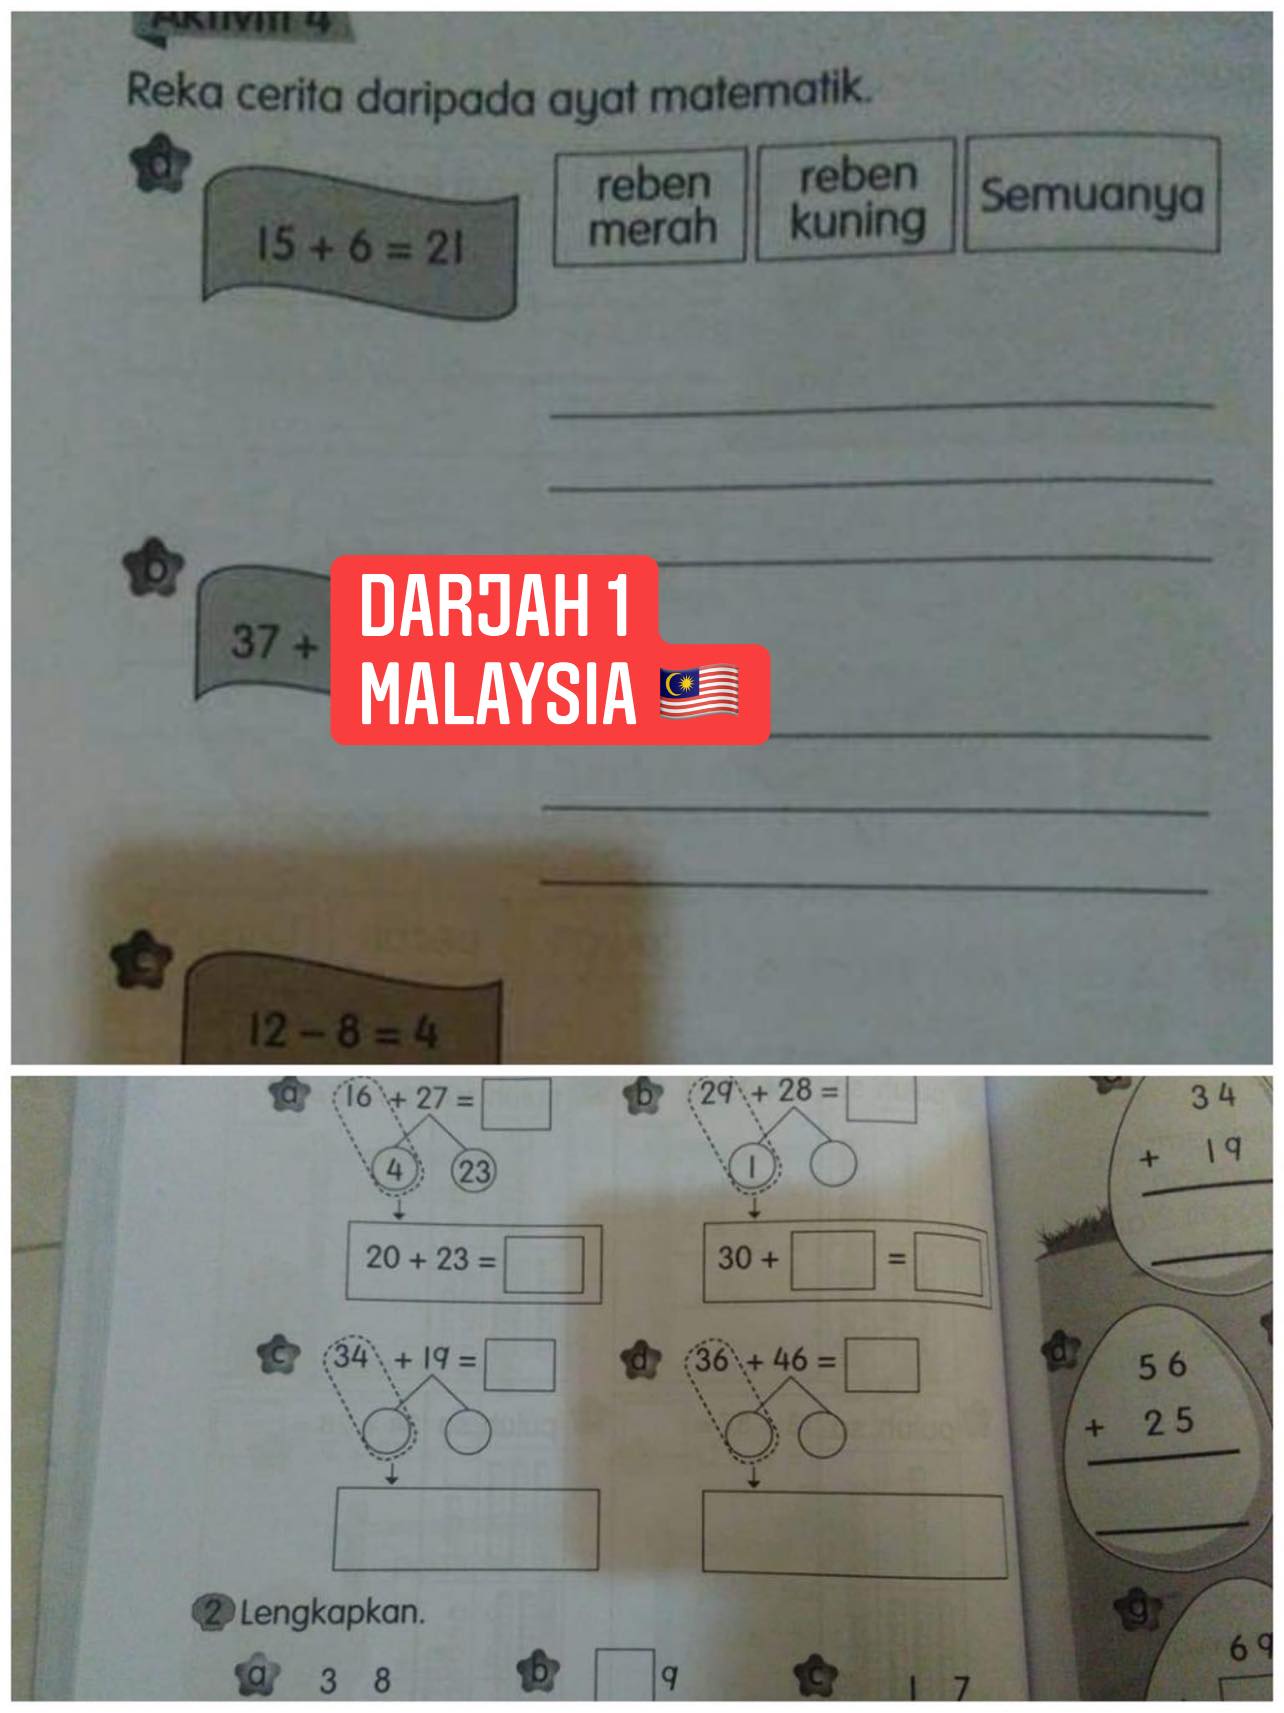 Malaysian Standard 1 students are already learning the multiplication tables in the local school system. Image credit: Saif Suhairi